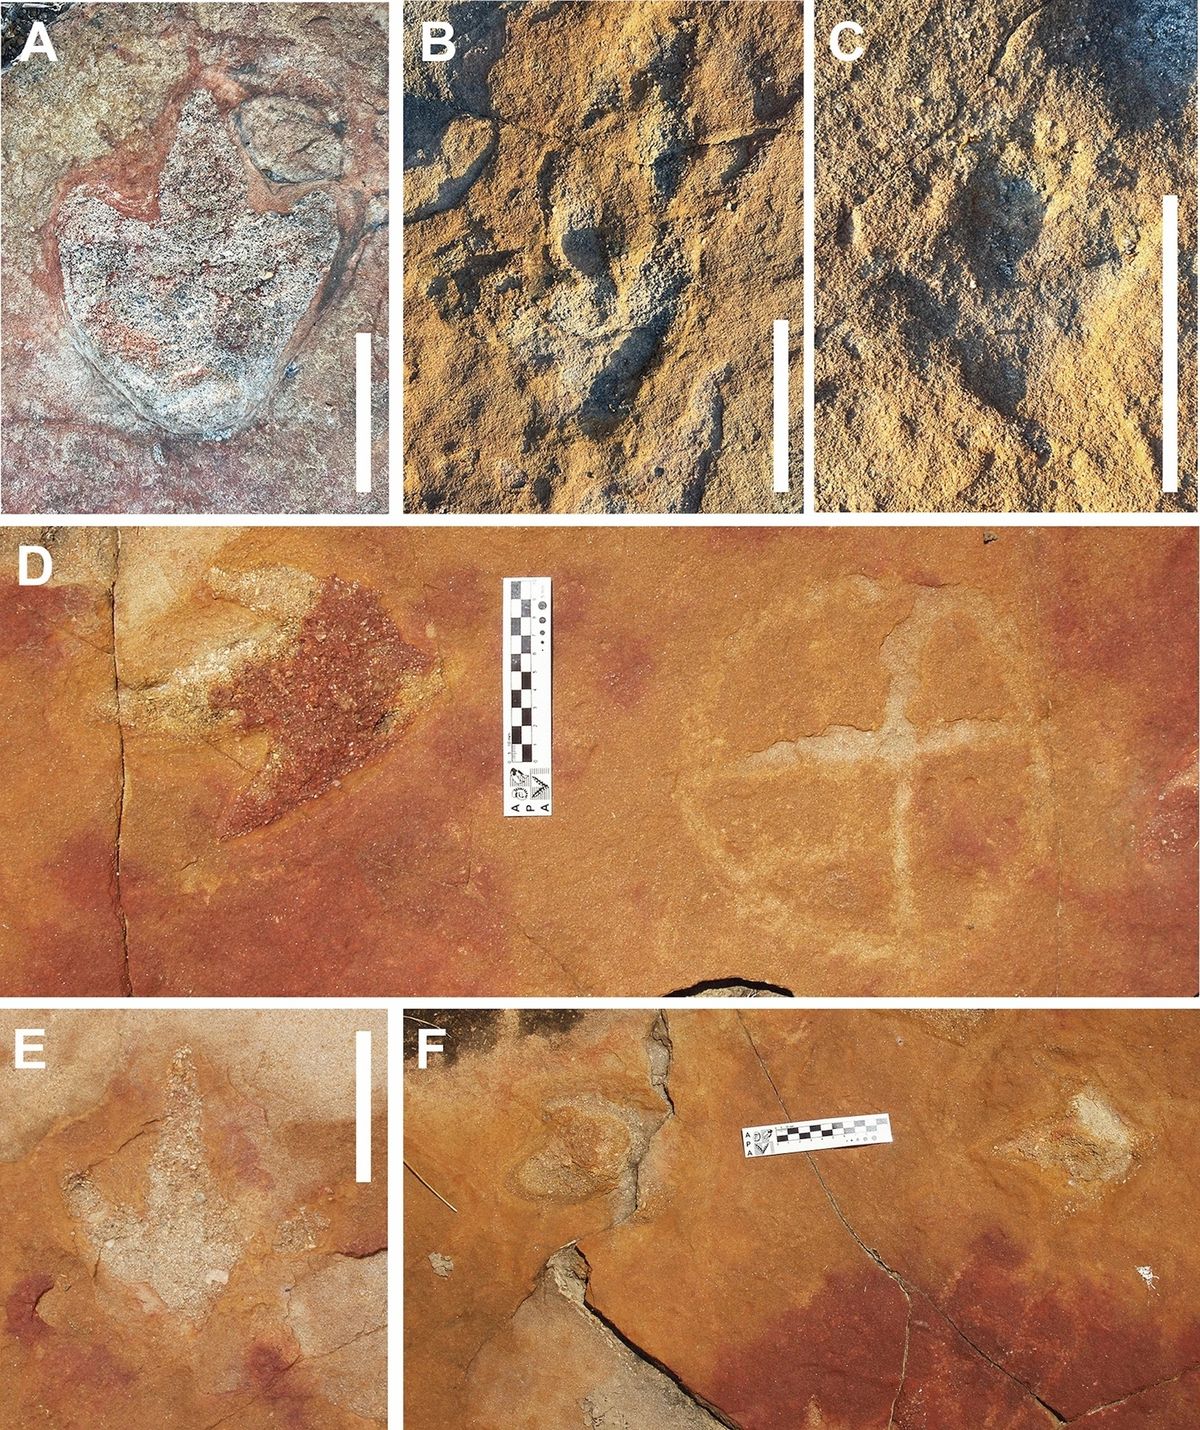 Different morphotypes of tridactyl footprints, all interpreted as belonging to theropod dinosaurs (A-F). (D) and (F) show footprints in close association with petroglyphs. Courtesy Leonardo P. Troiano, Heloísa B. dos Santos, Tito Aureliano and Aline M. Ghilardi; Scientific Reports